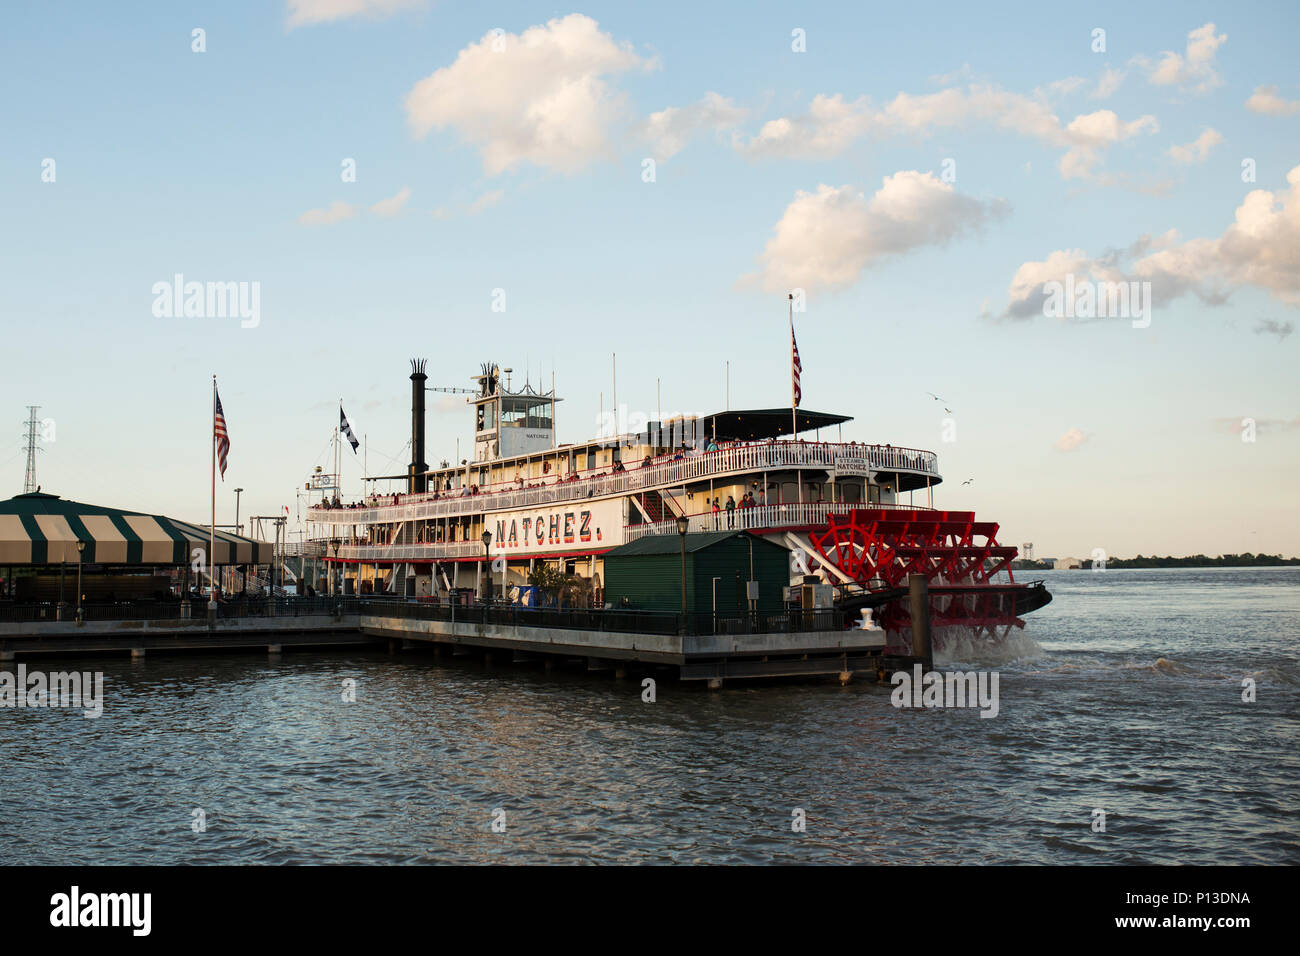 The paddlewheeler Natchez docked at sunset along the Mississippi River in New Orleans, Louisiana. Stock Photo